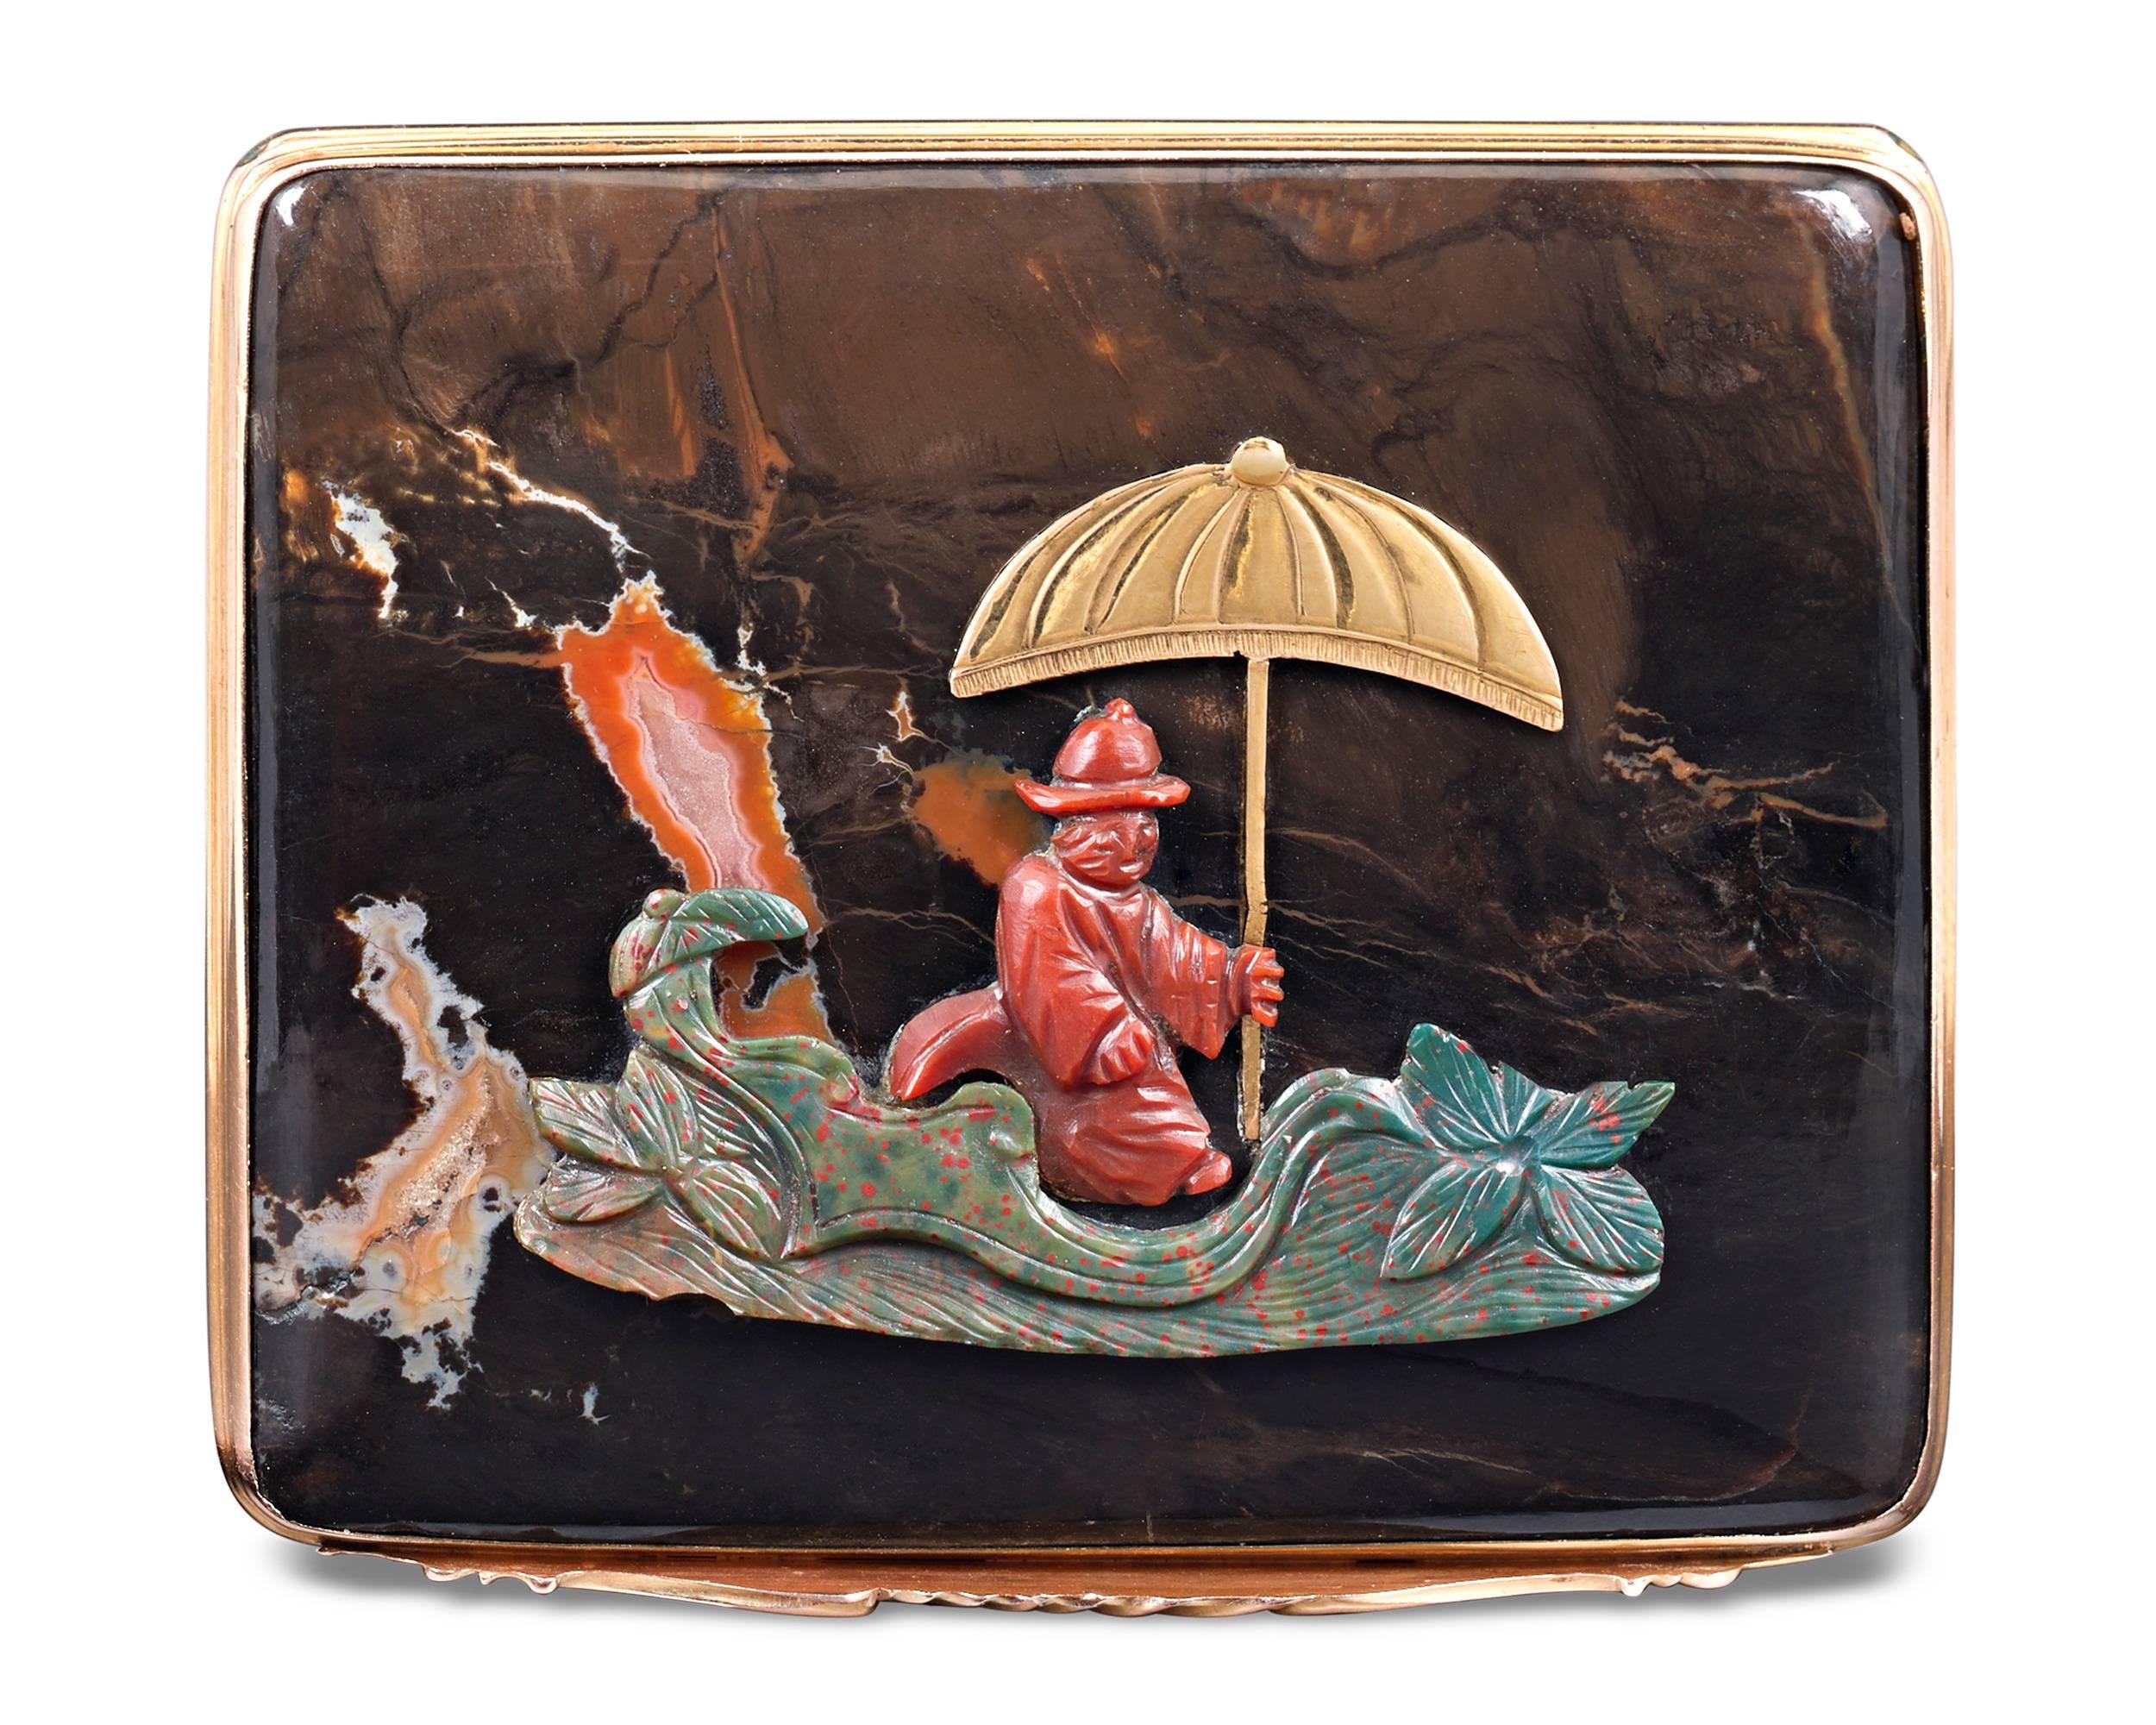 A marvelously carved chinoiserie motif adorns the lid of this incredible 19th-century French tabatière or snuff box. The charming scene is intricately crafted in the form of a boating figure who holds aloft an umbrella formed of yellow gold, while